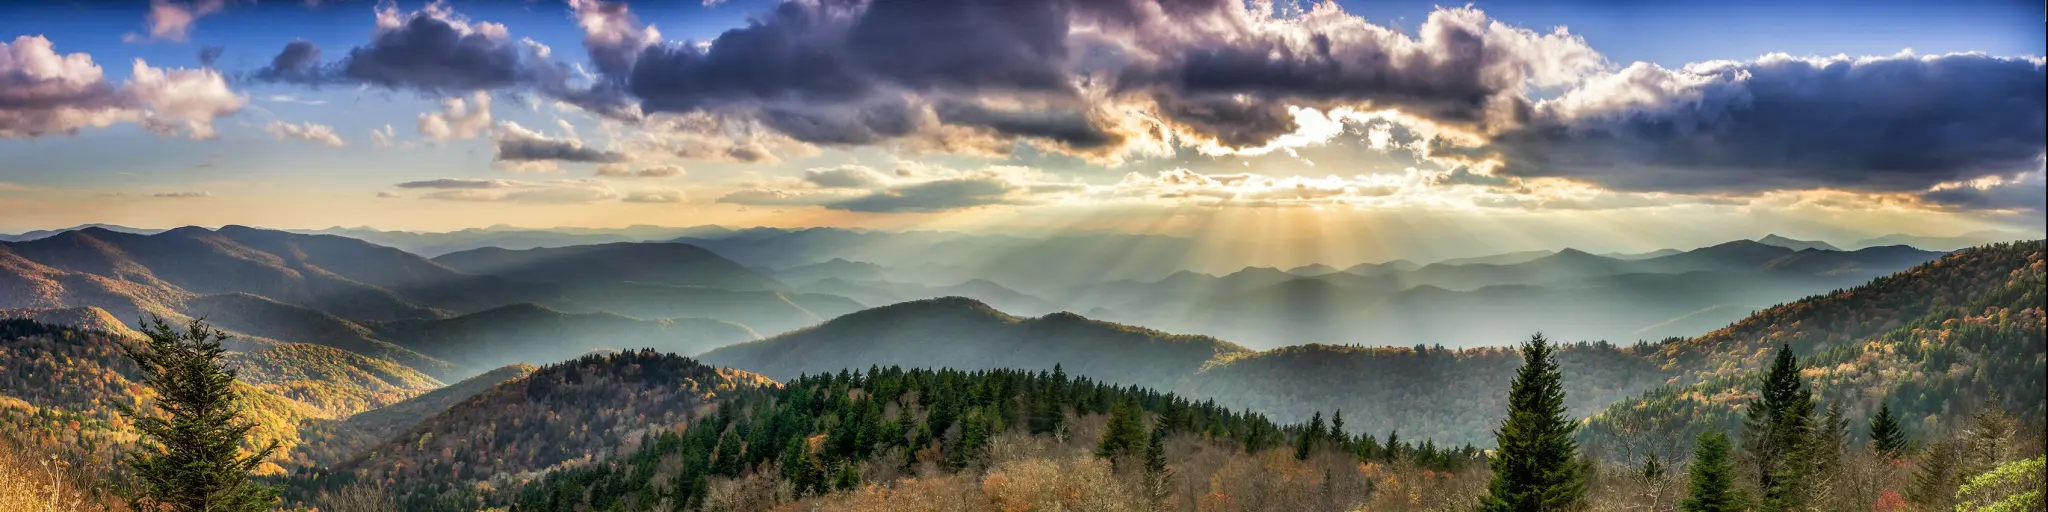 Panoramic view of tree covered mountains lit up with bright sun beams